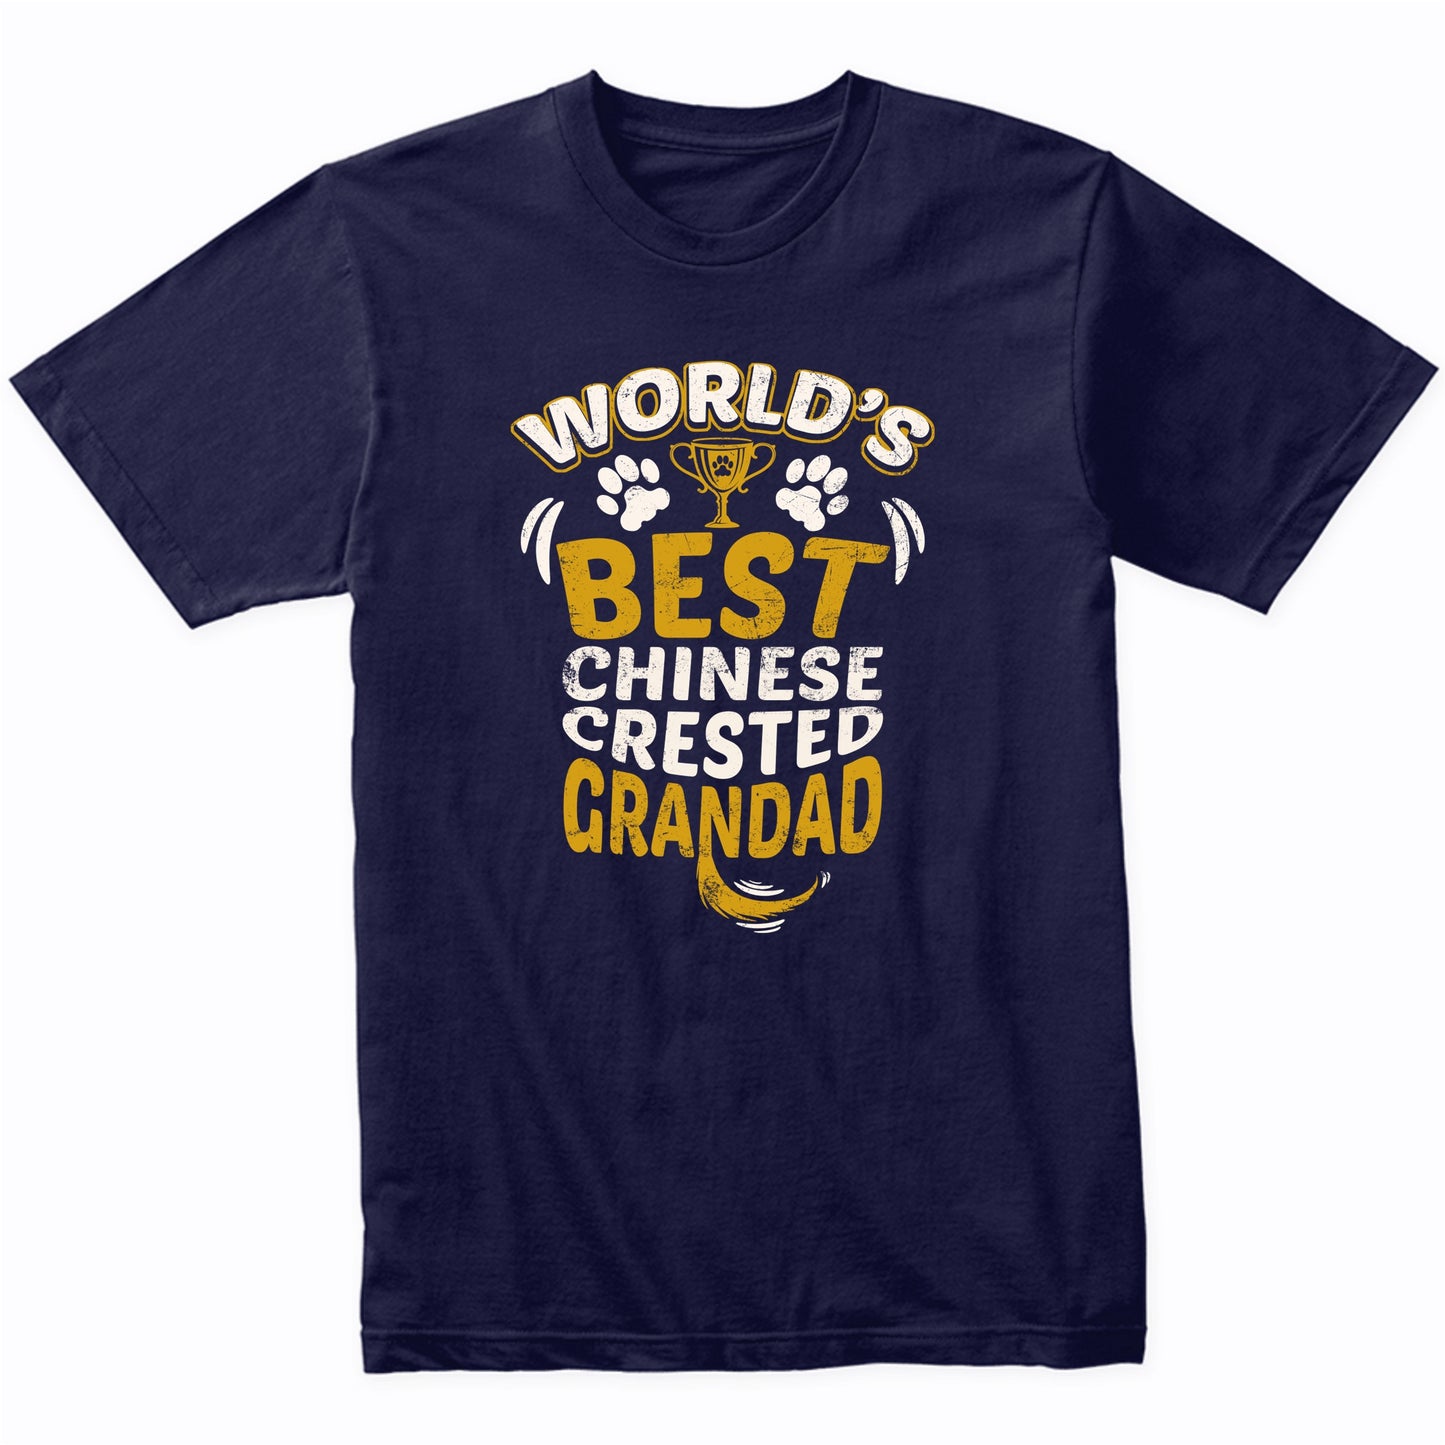 World's Best Chinese Crested Grandad Graphic T-Shirt